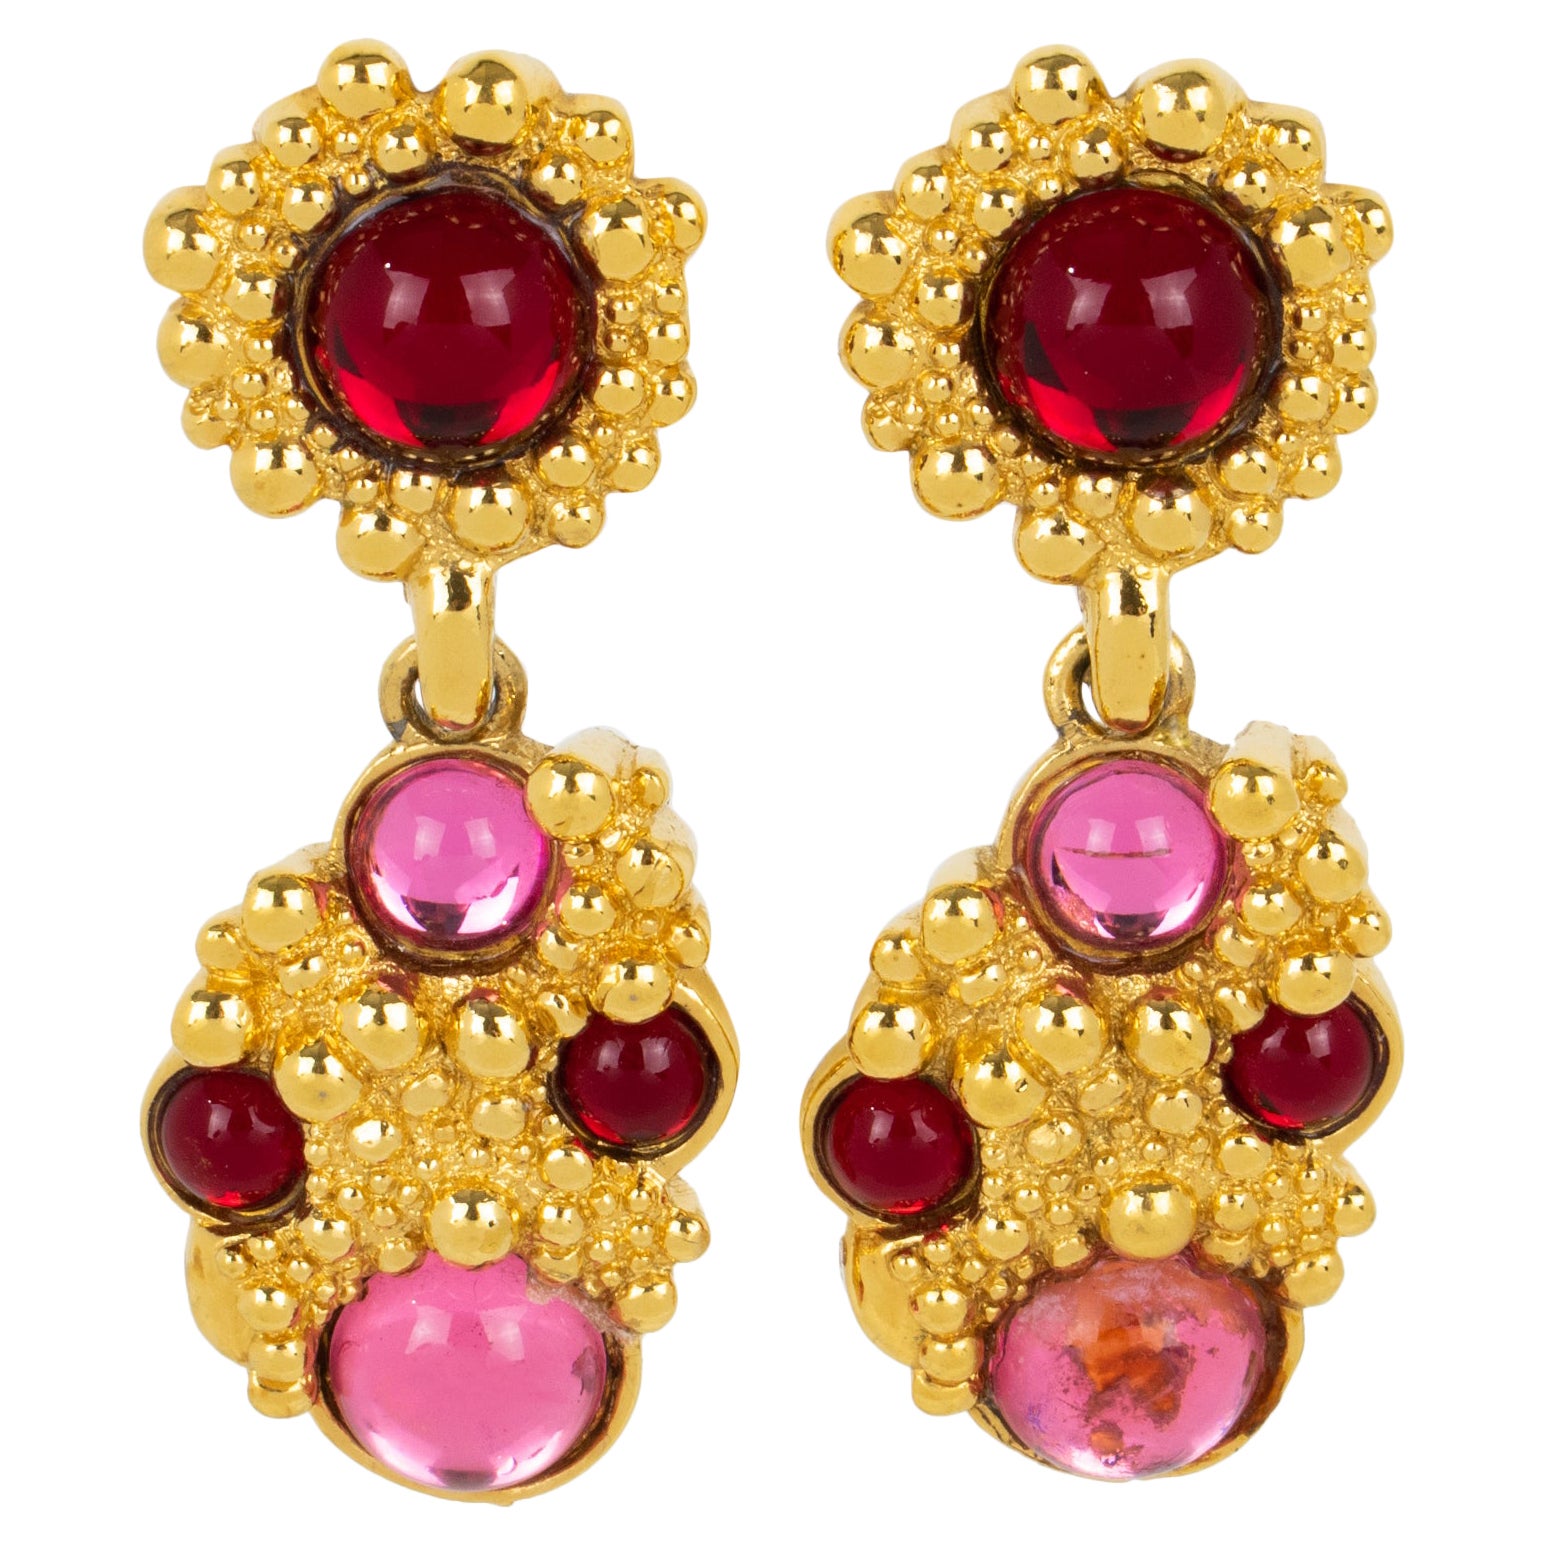 Guy Laroche Dangle Gilt Metal Clip Earrings Pink and Red Poured Glass Cabochons